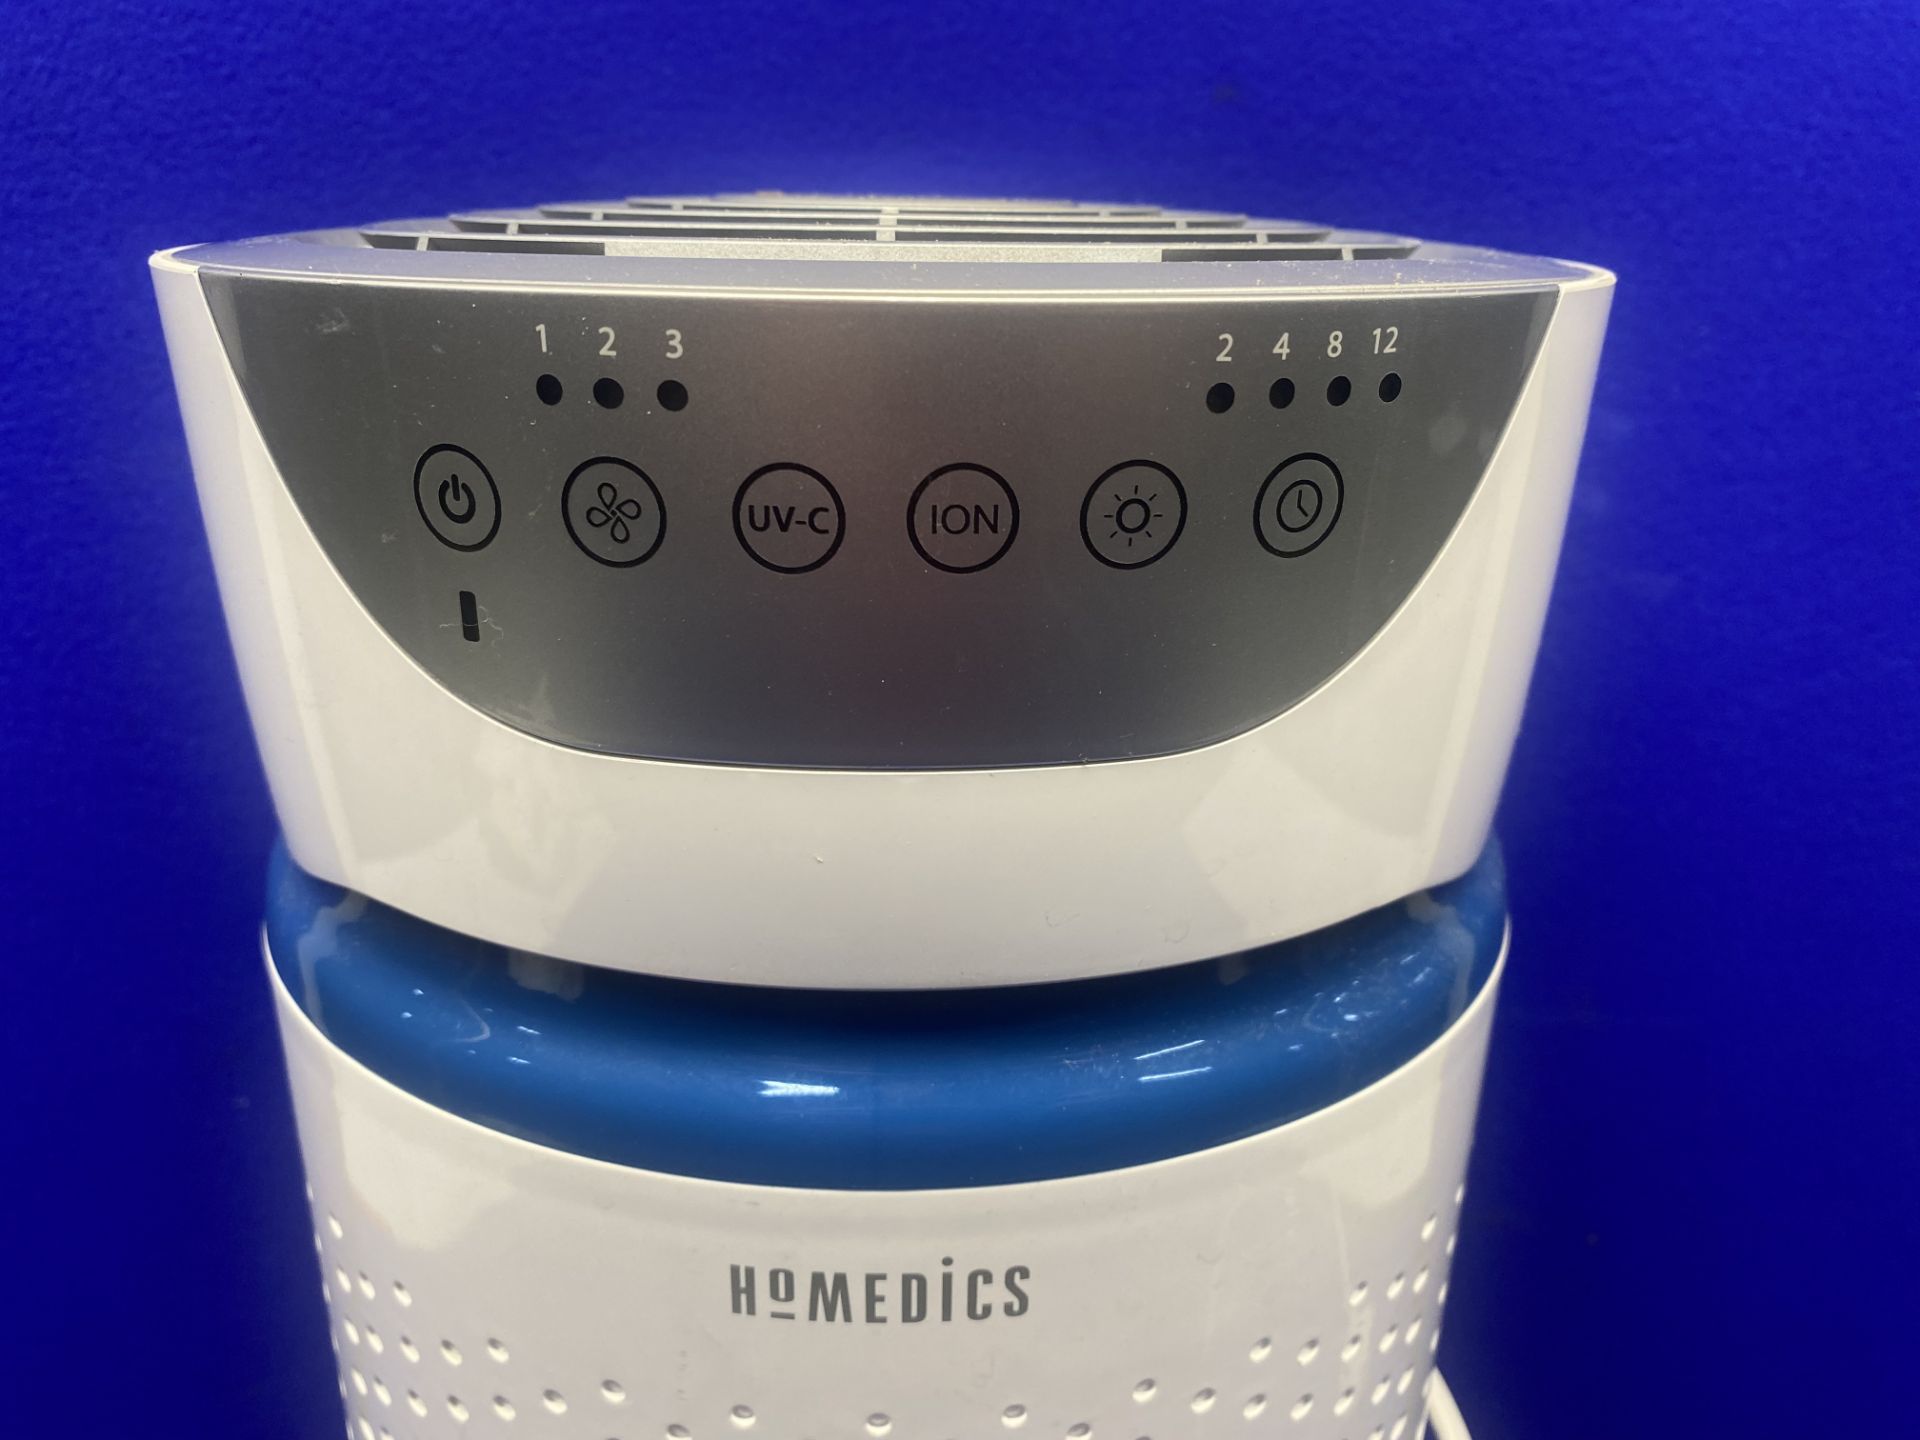 Homedics AP-T20WT-GB 5 in 1 TotalClean air purifier - small - Image 3 of 6